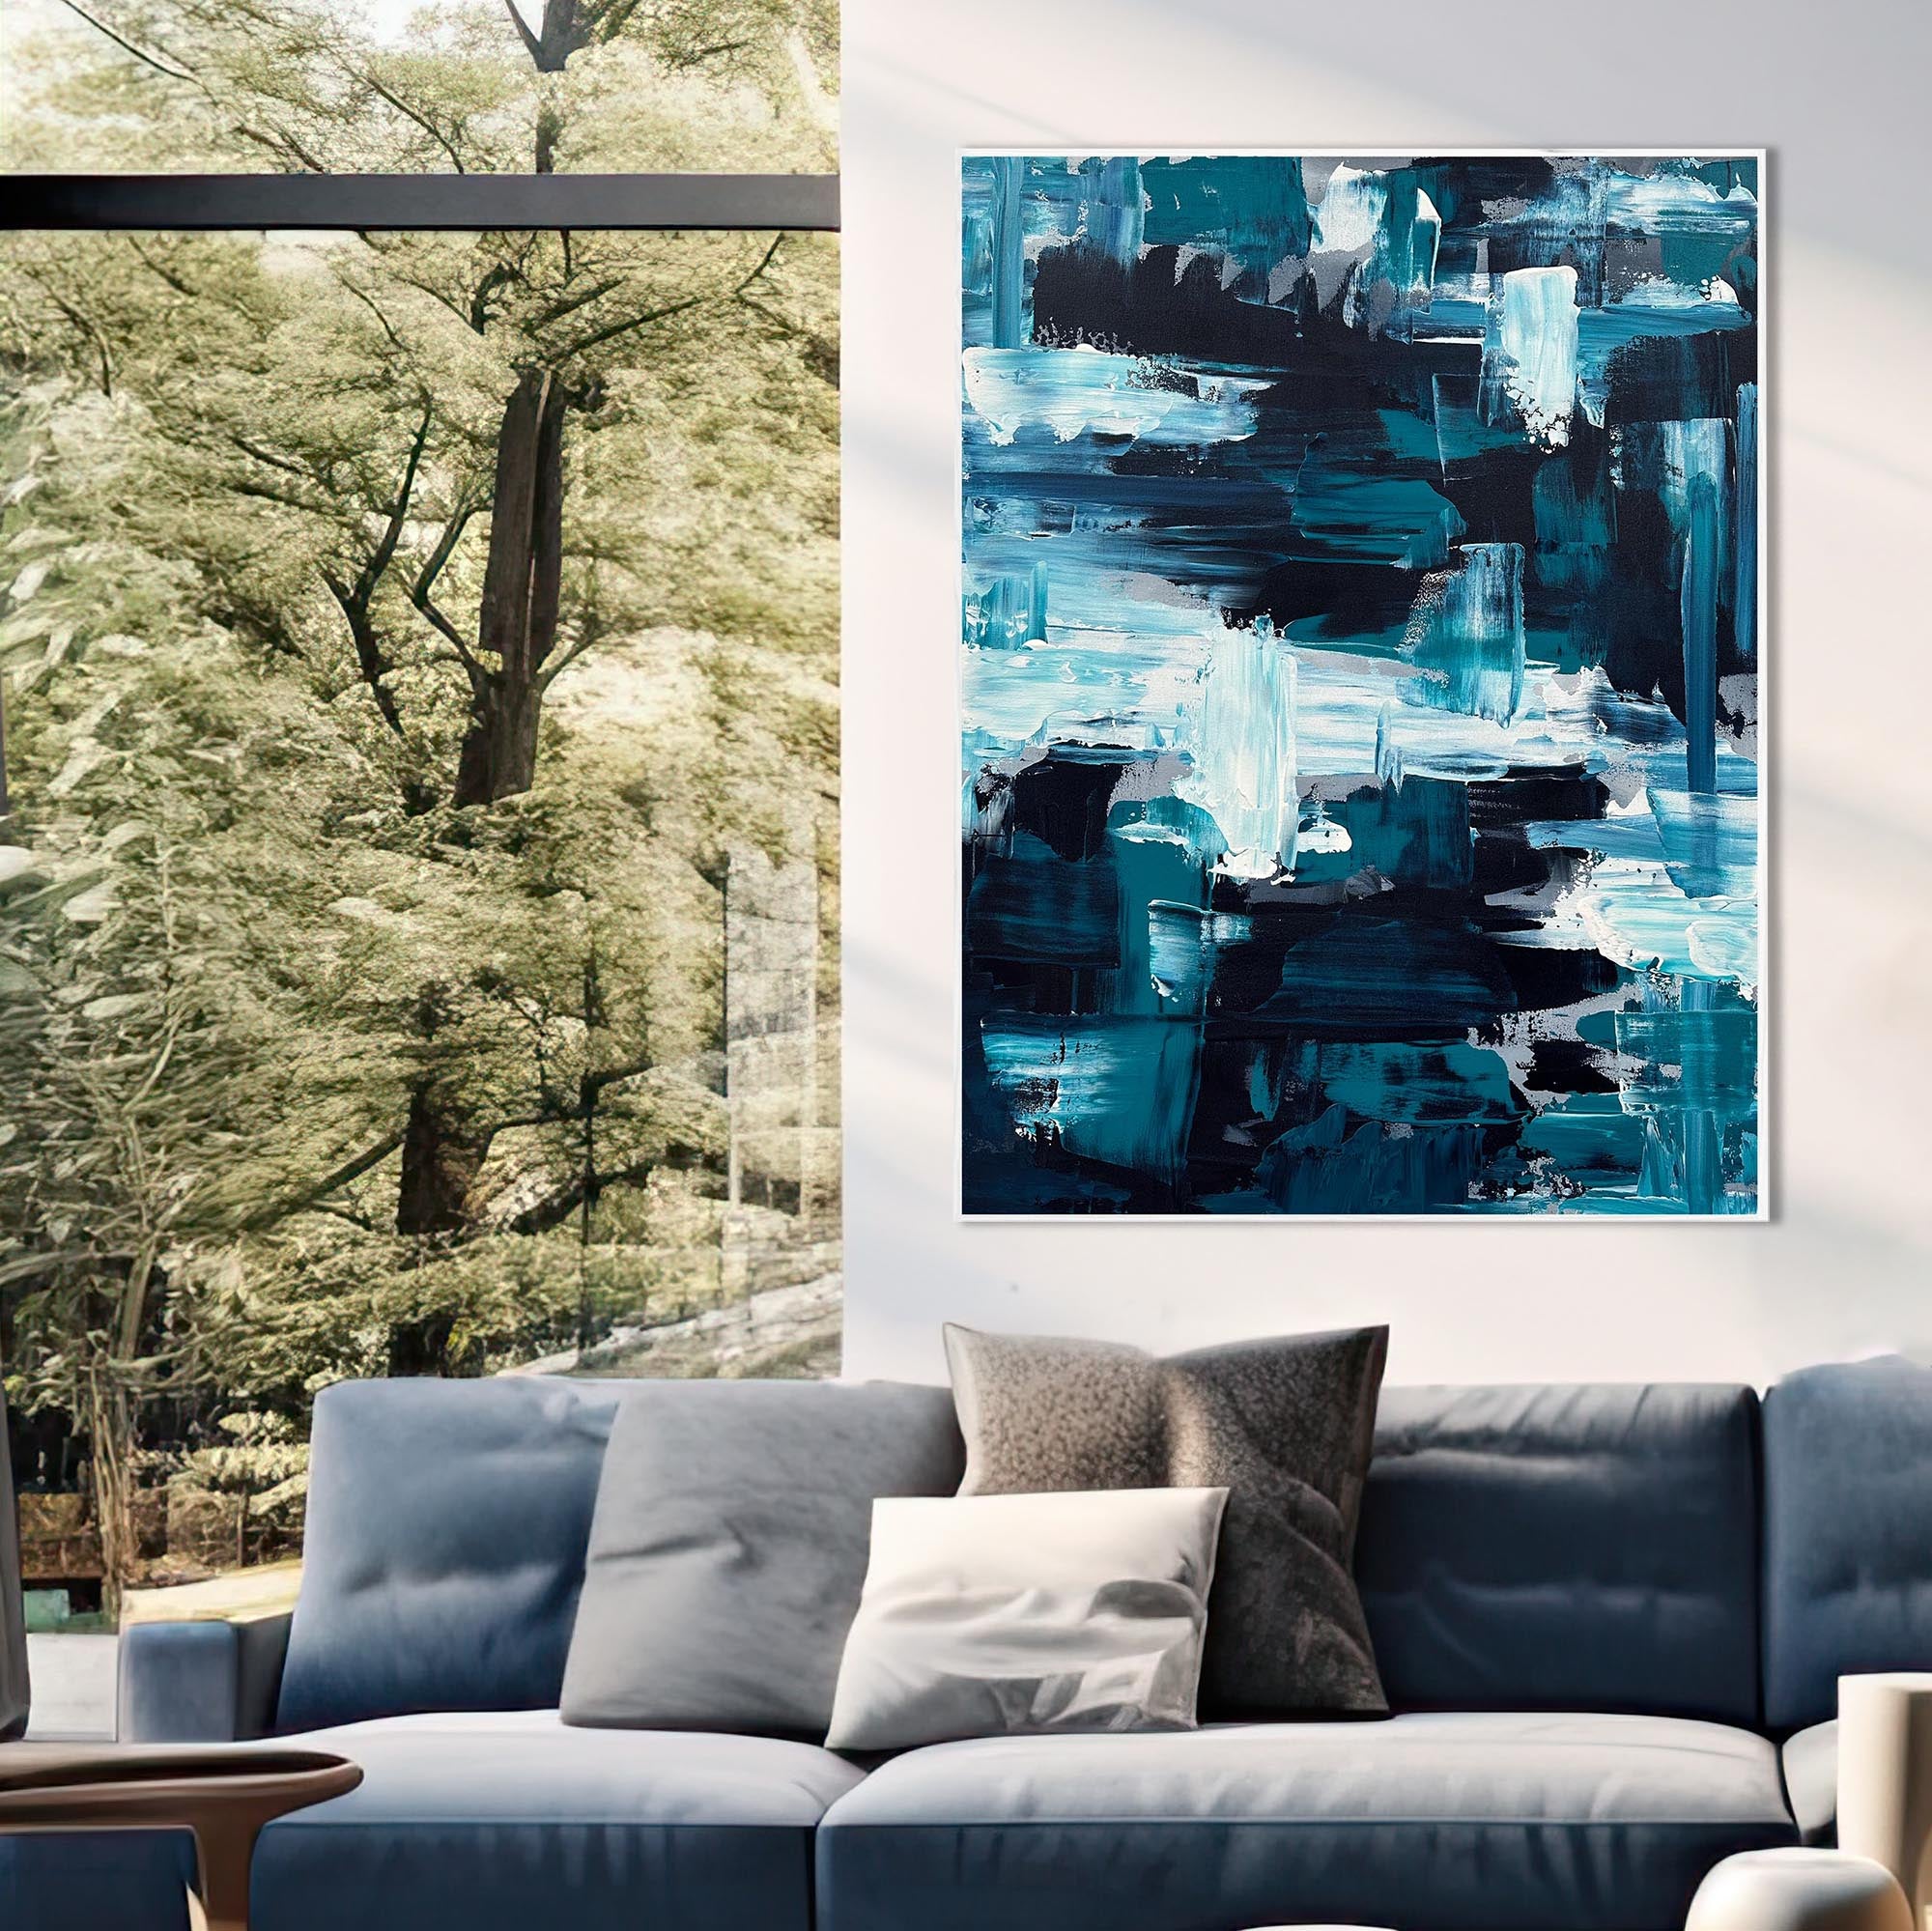 Deep In Thoughts - Original Painting-Abstract House